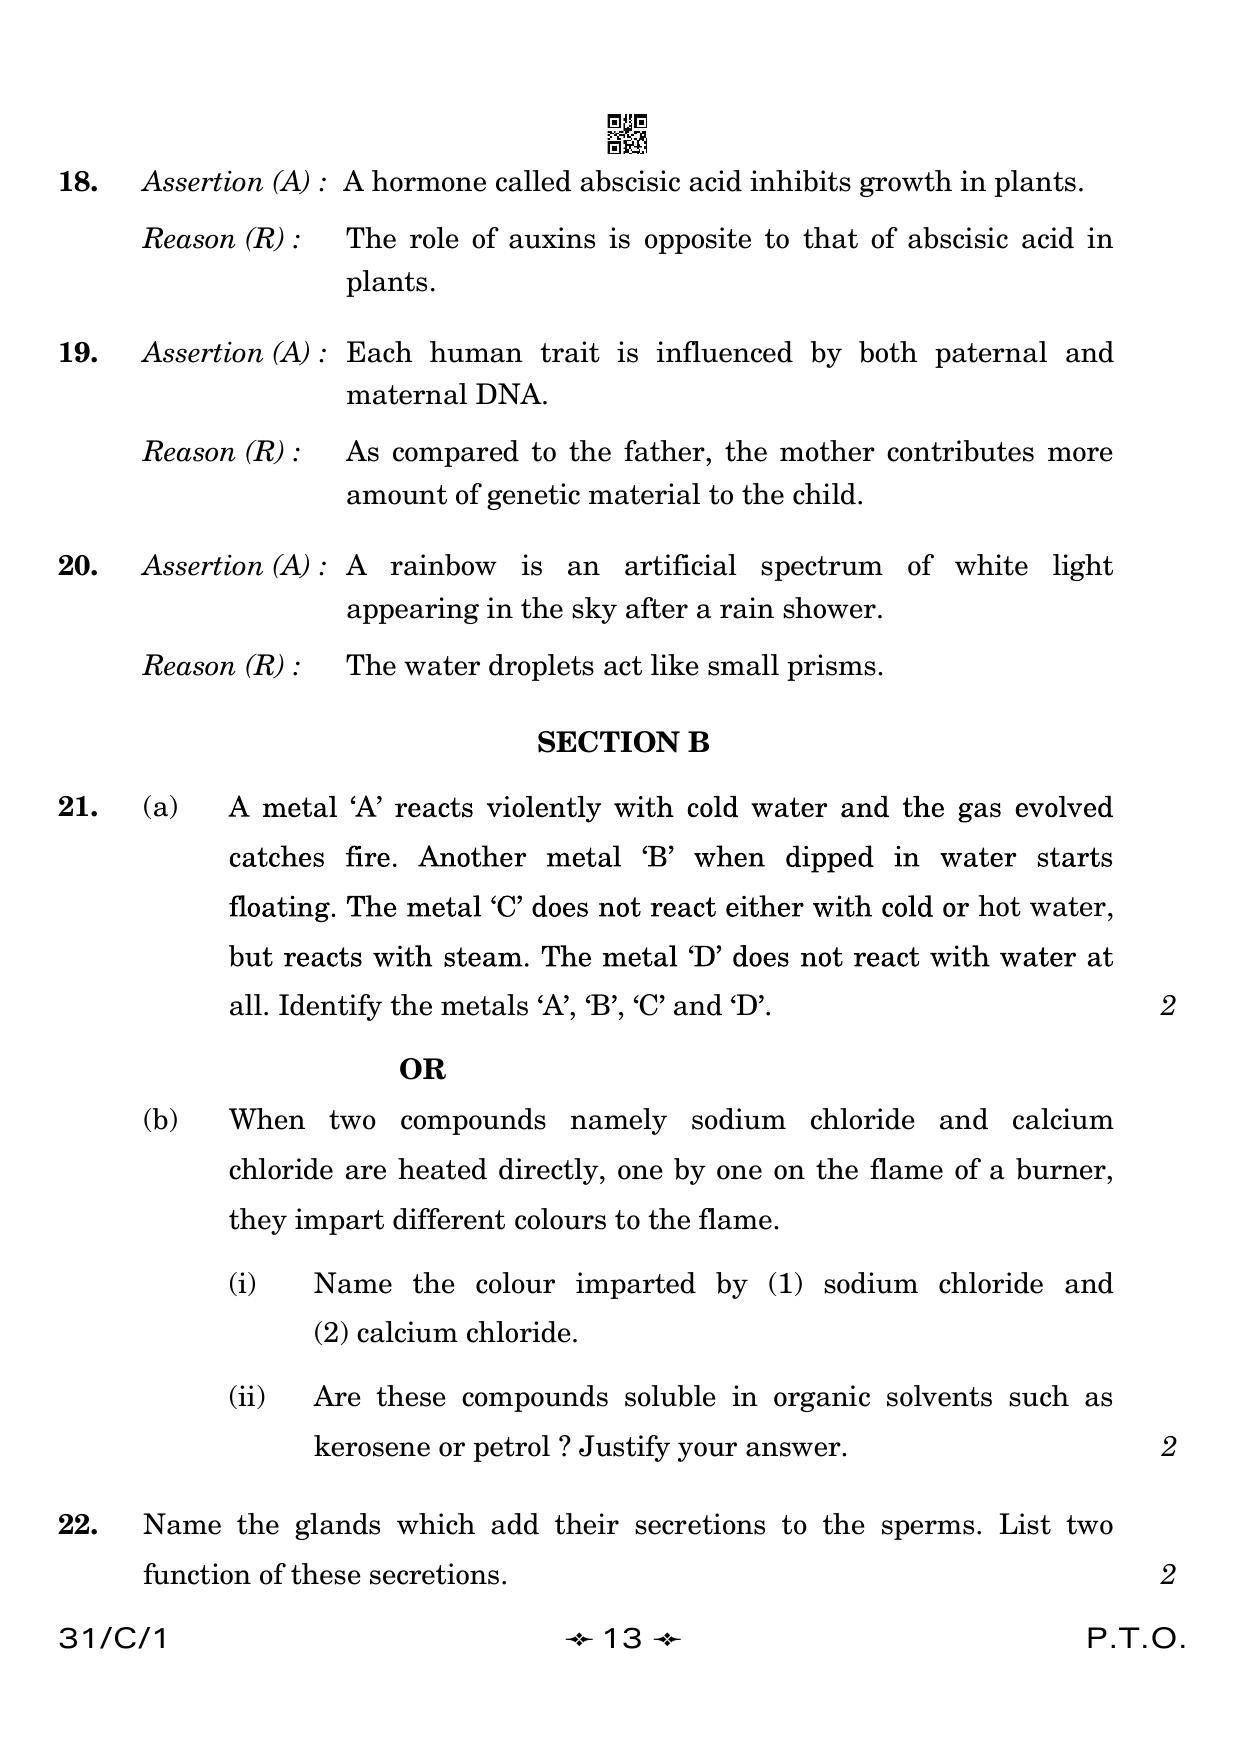 CBSE Class 10 31-1 Science 2023 (Compartment) Question Paper - Page 13